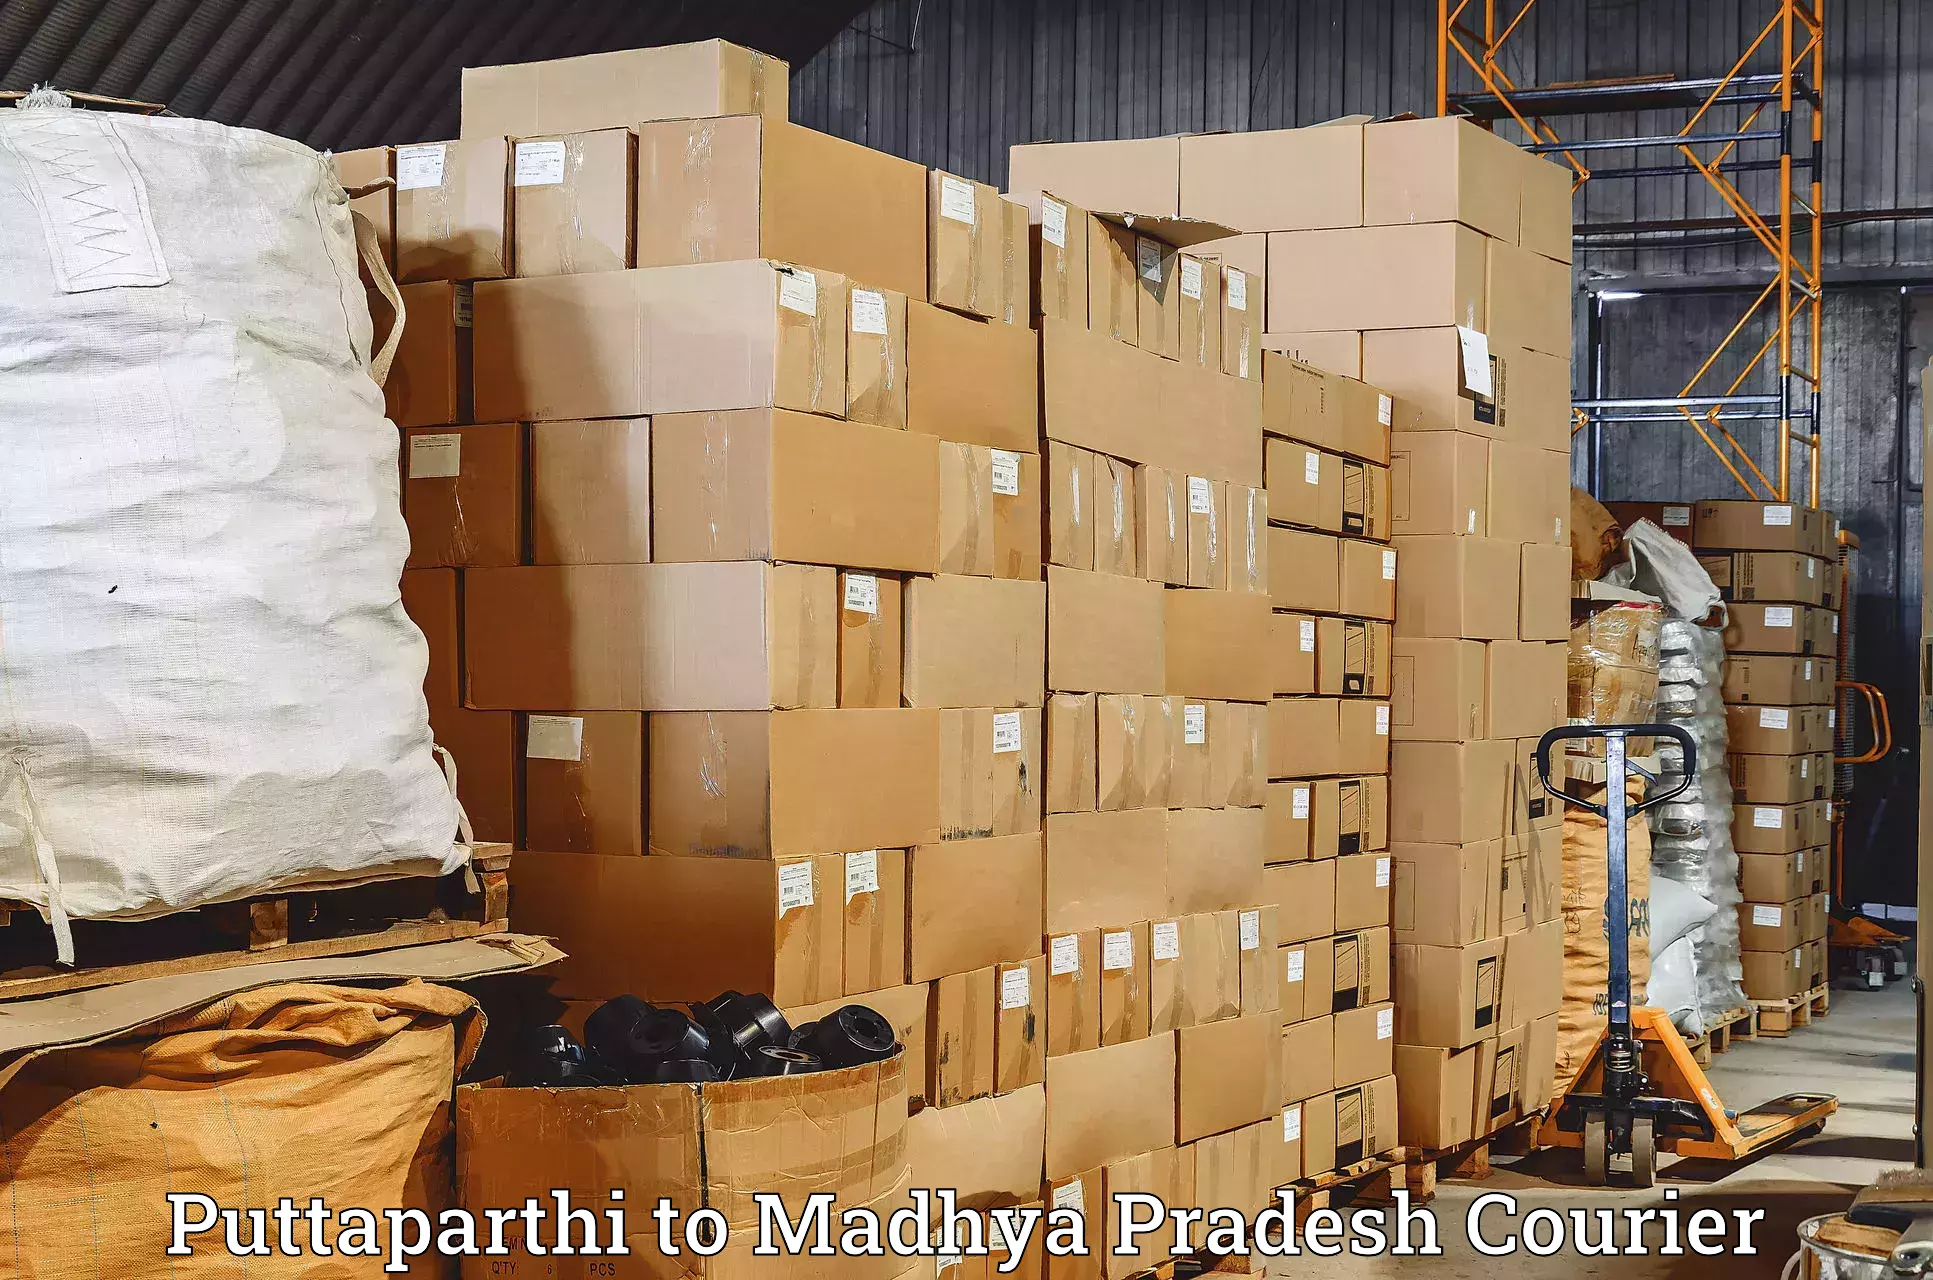 Courier rate comparison in Puttaparthi to Gwalior